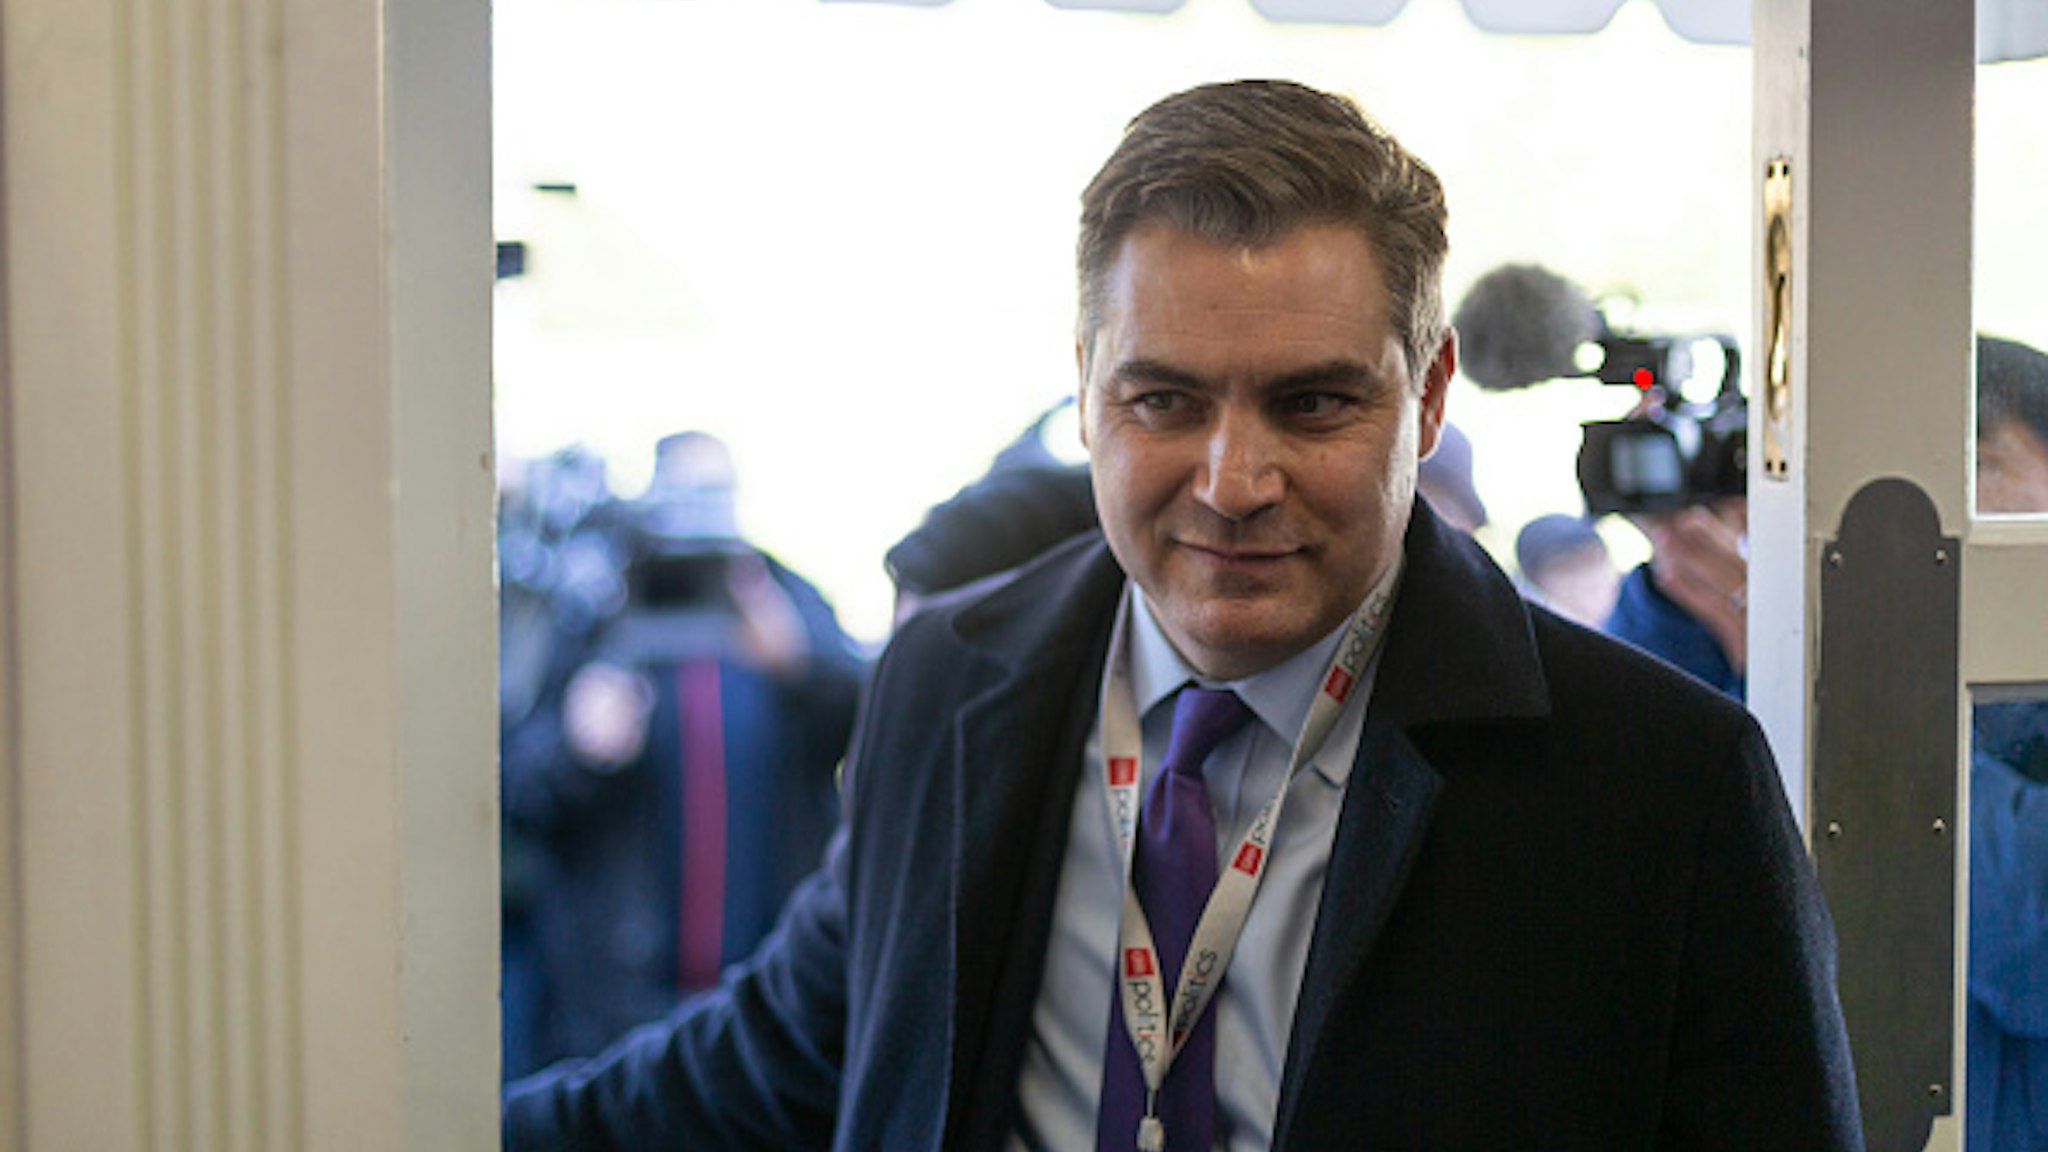 CNN's Jim Acosta's enters the James S. Brady Press Briefing Room of the White House in Washington, D.C., after a judge ordered the Trump Administration to return his press pass. On Friday, November 16, 2018.